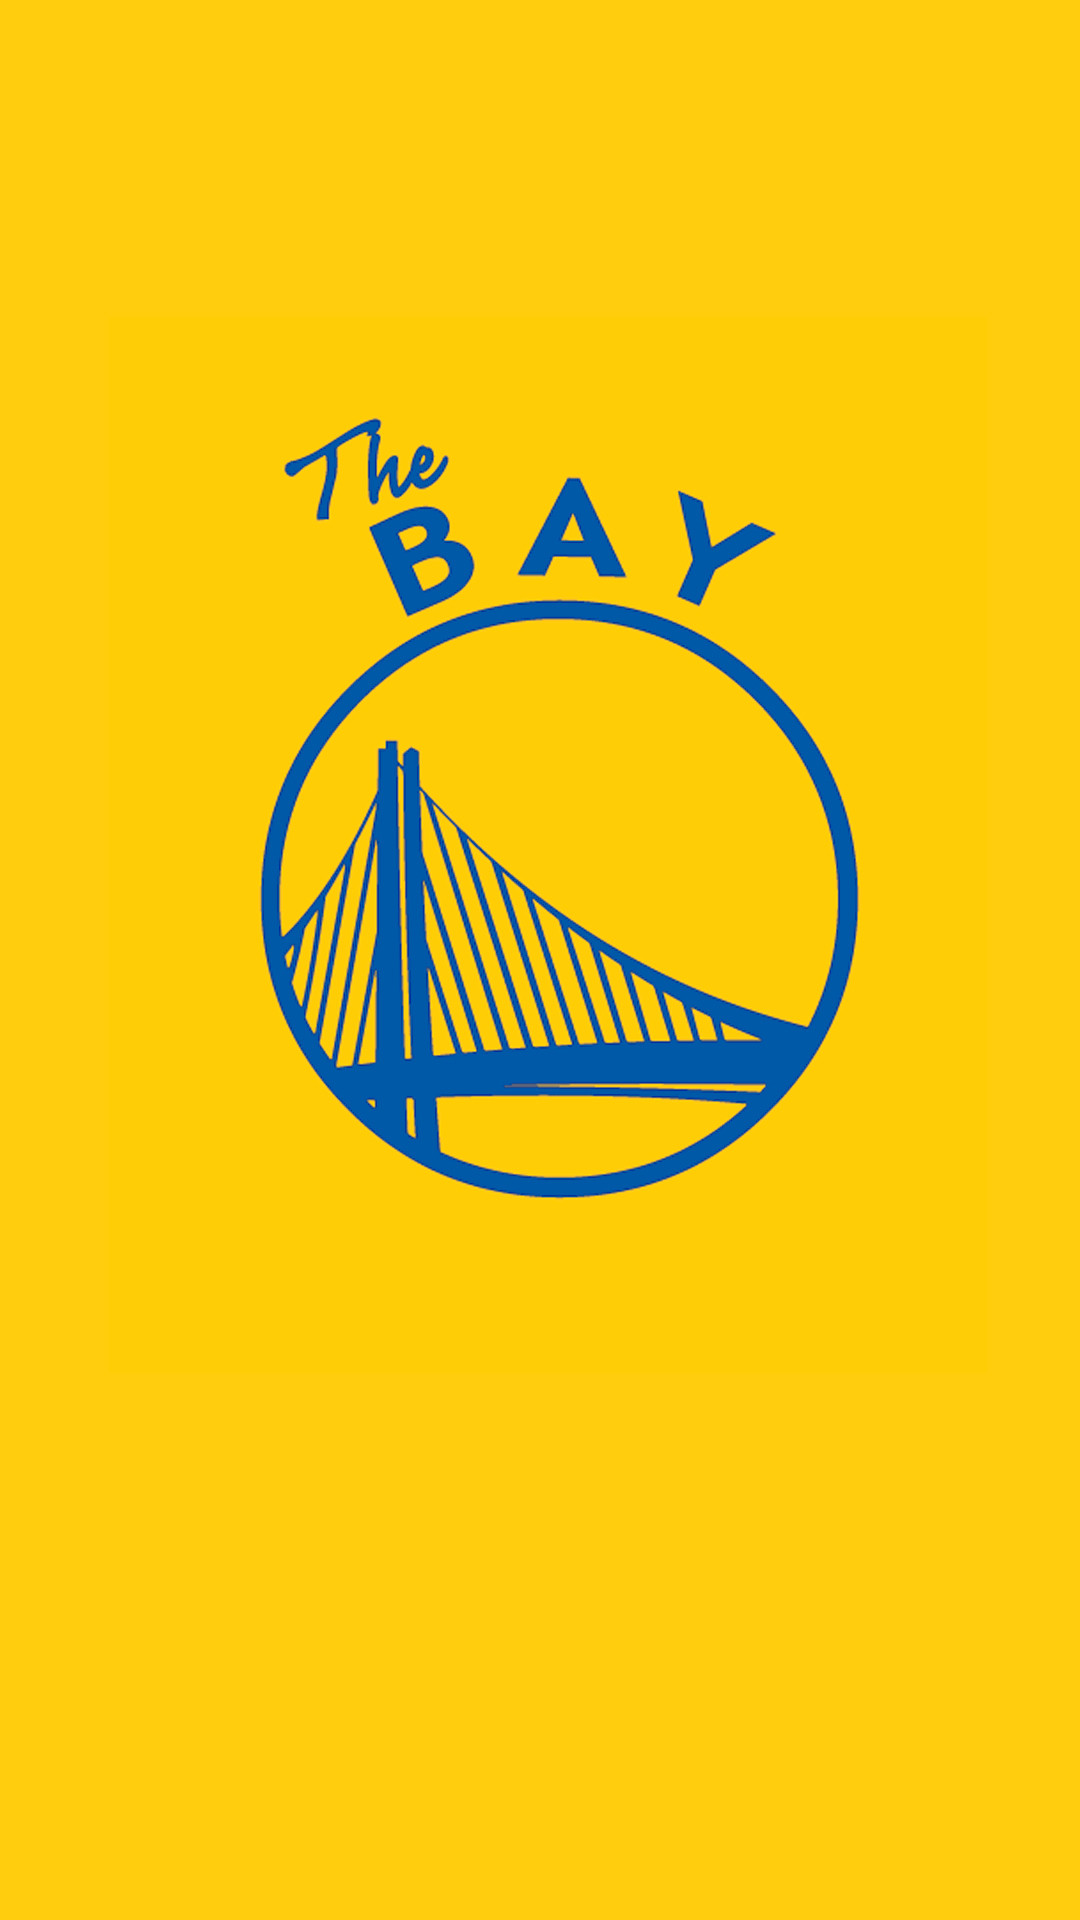 Golden State Warriors 1080P 2k 4k HD wallpapers backgrounds free  download  Rare Gallery